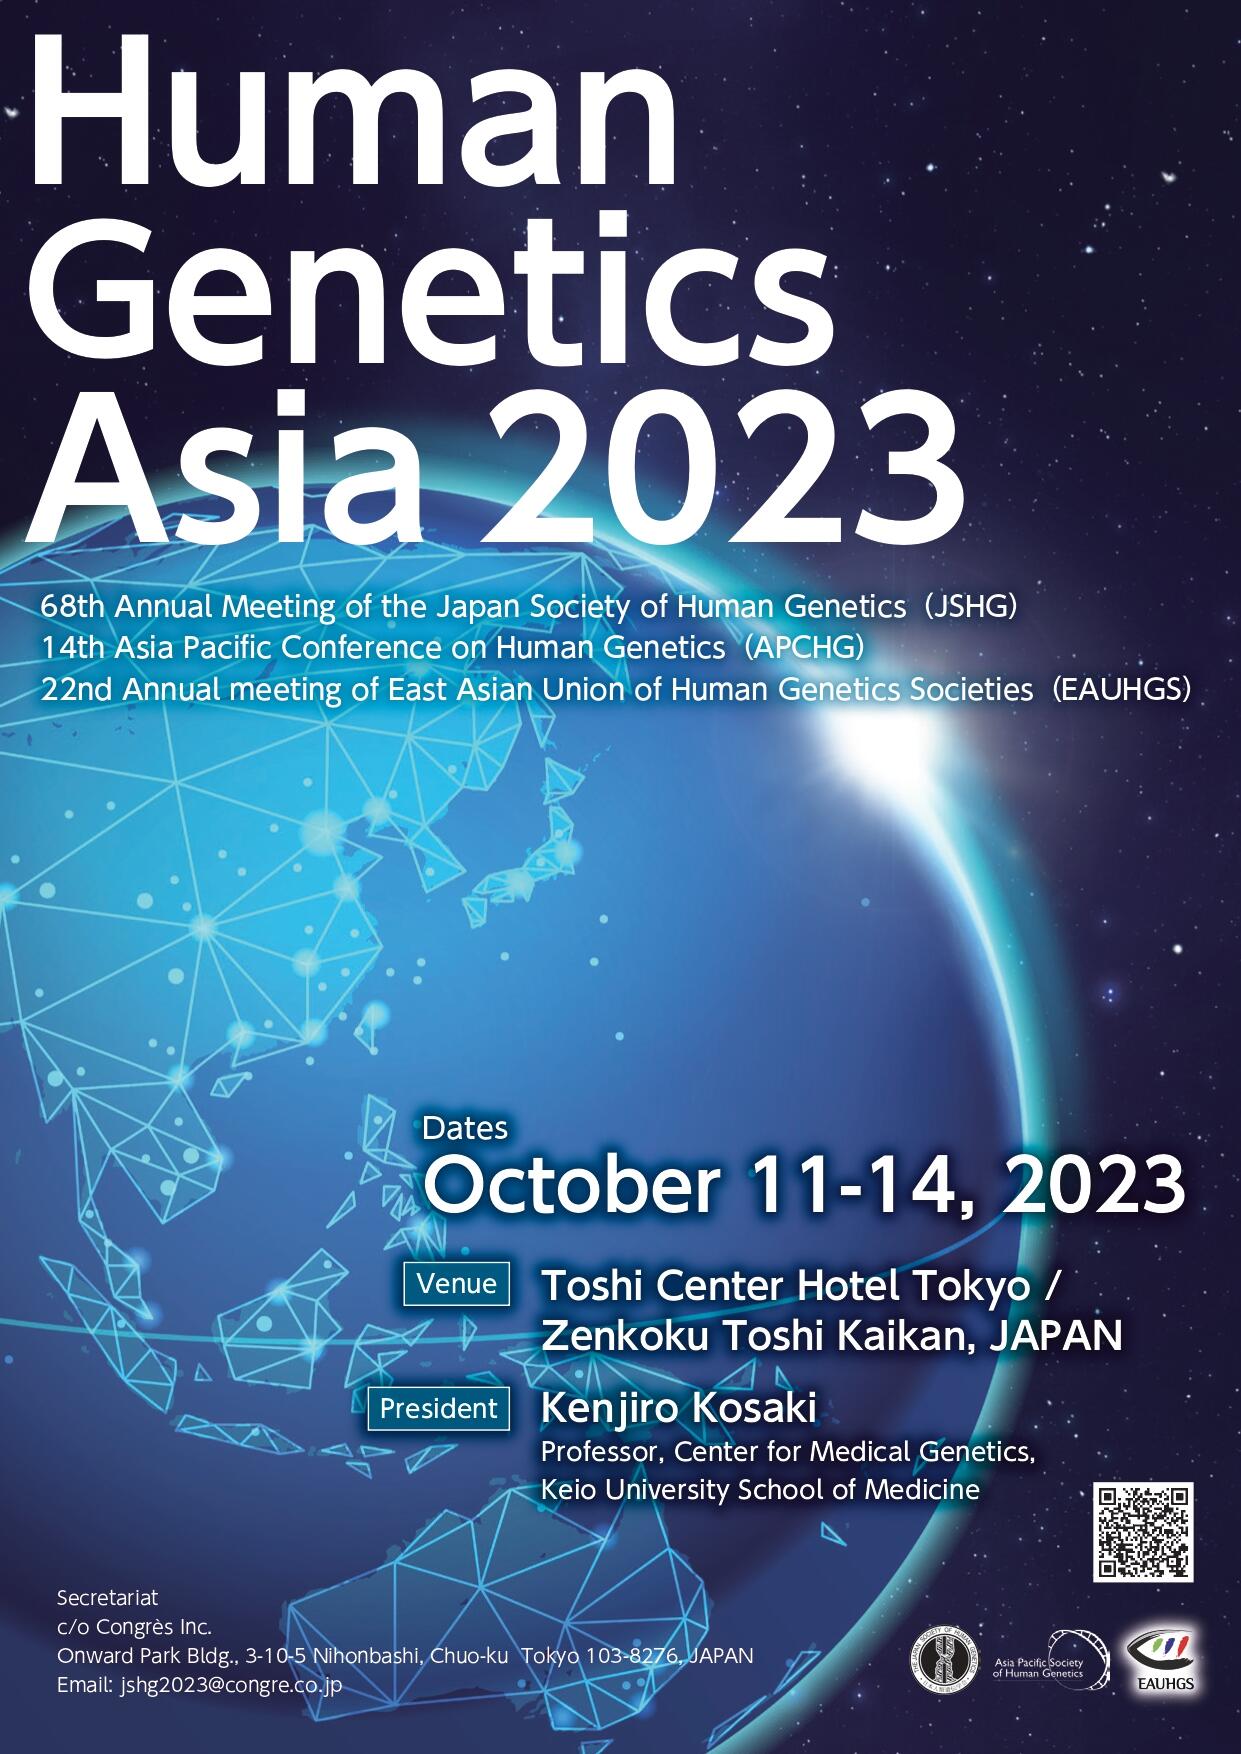 Tokyo to host the first joint conference of the Japan Society of Human Genetics, the Asia Pacific Society of Human Genetics and the East Asian Union of Human Genetics Societies in 2023 (Human Genetics Asia 2023 [HGA2023])